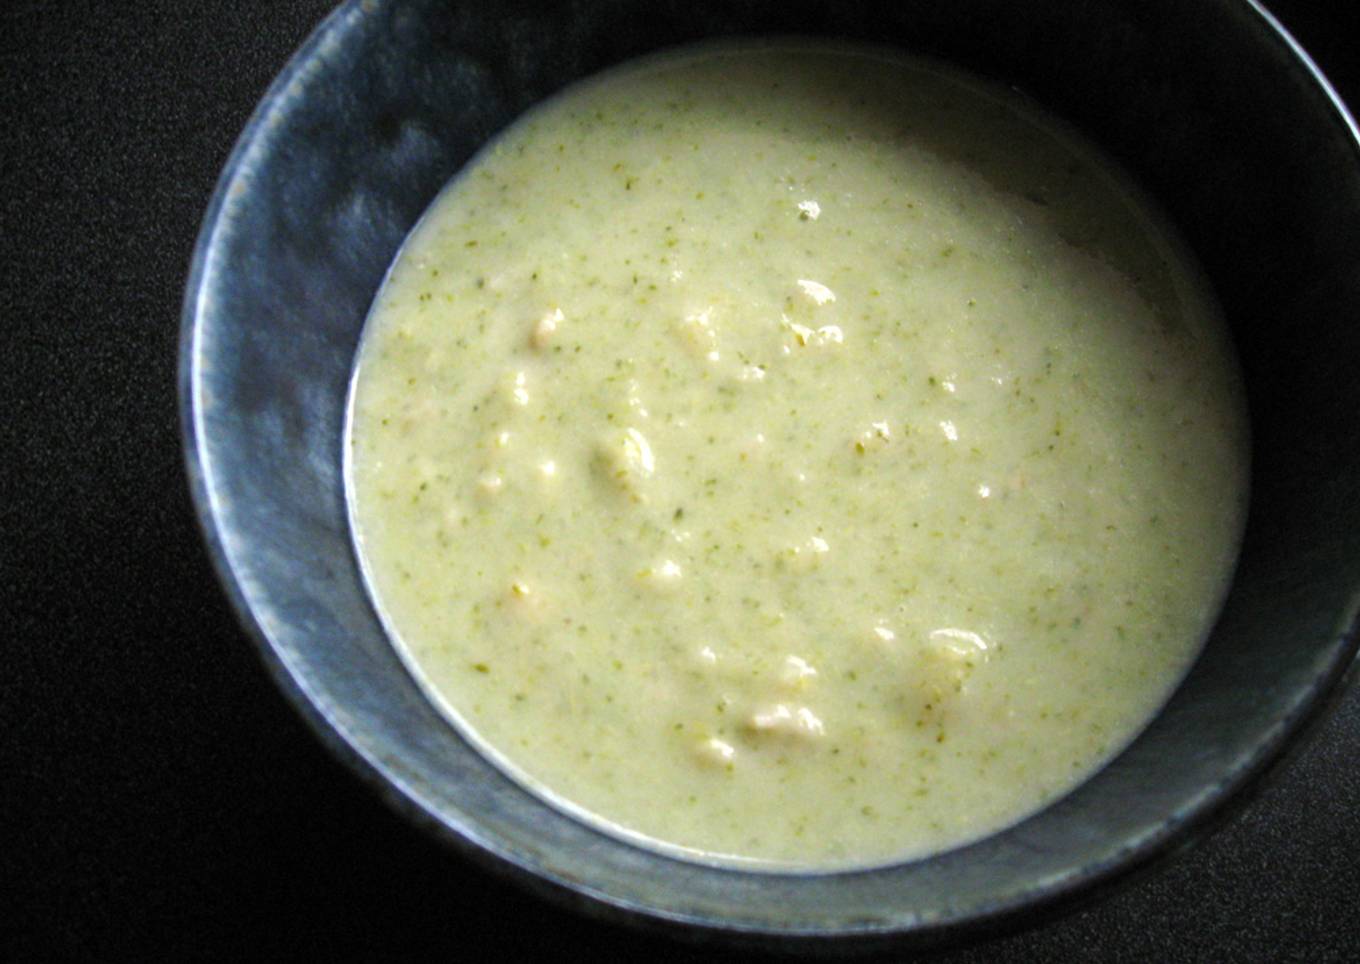 Creamy Soup of Broccoli That Turned Yellow